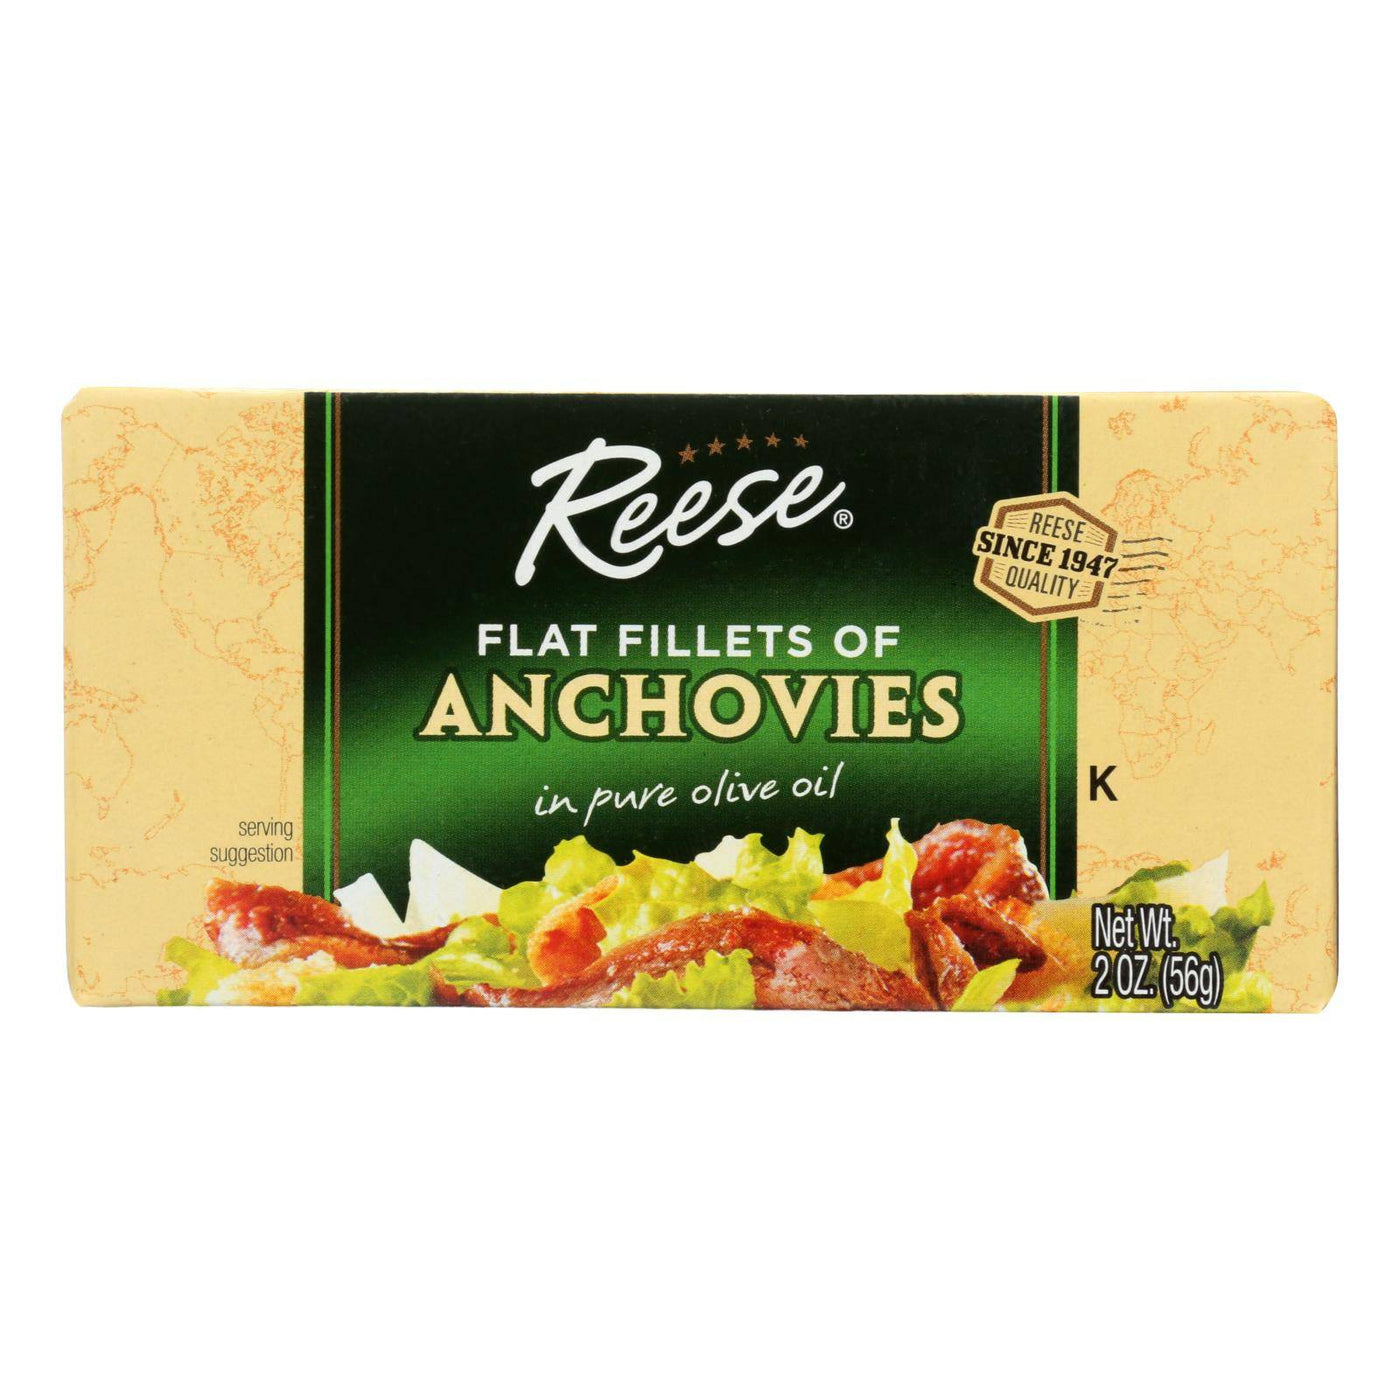 Reese Anchovies - Flat Fillets - In Pure Olive Oil - 2 Oz - Case Of 10 | OnlyNaturals.us